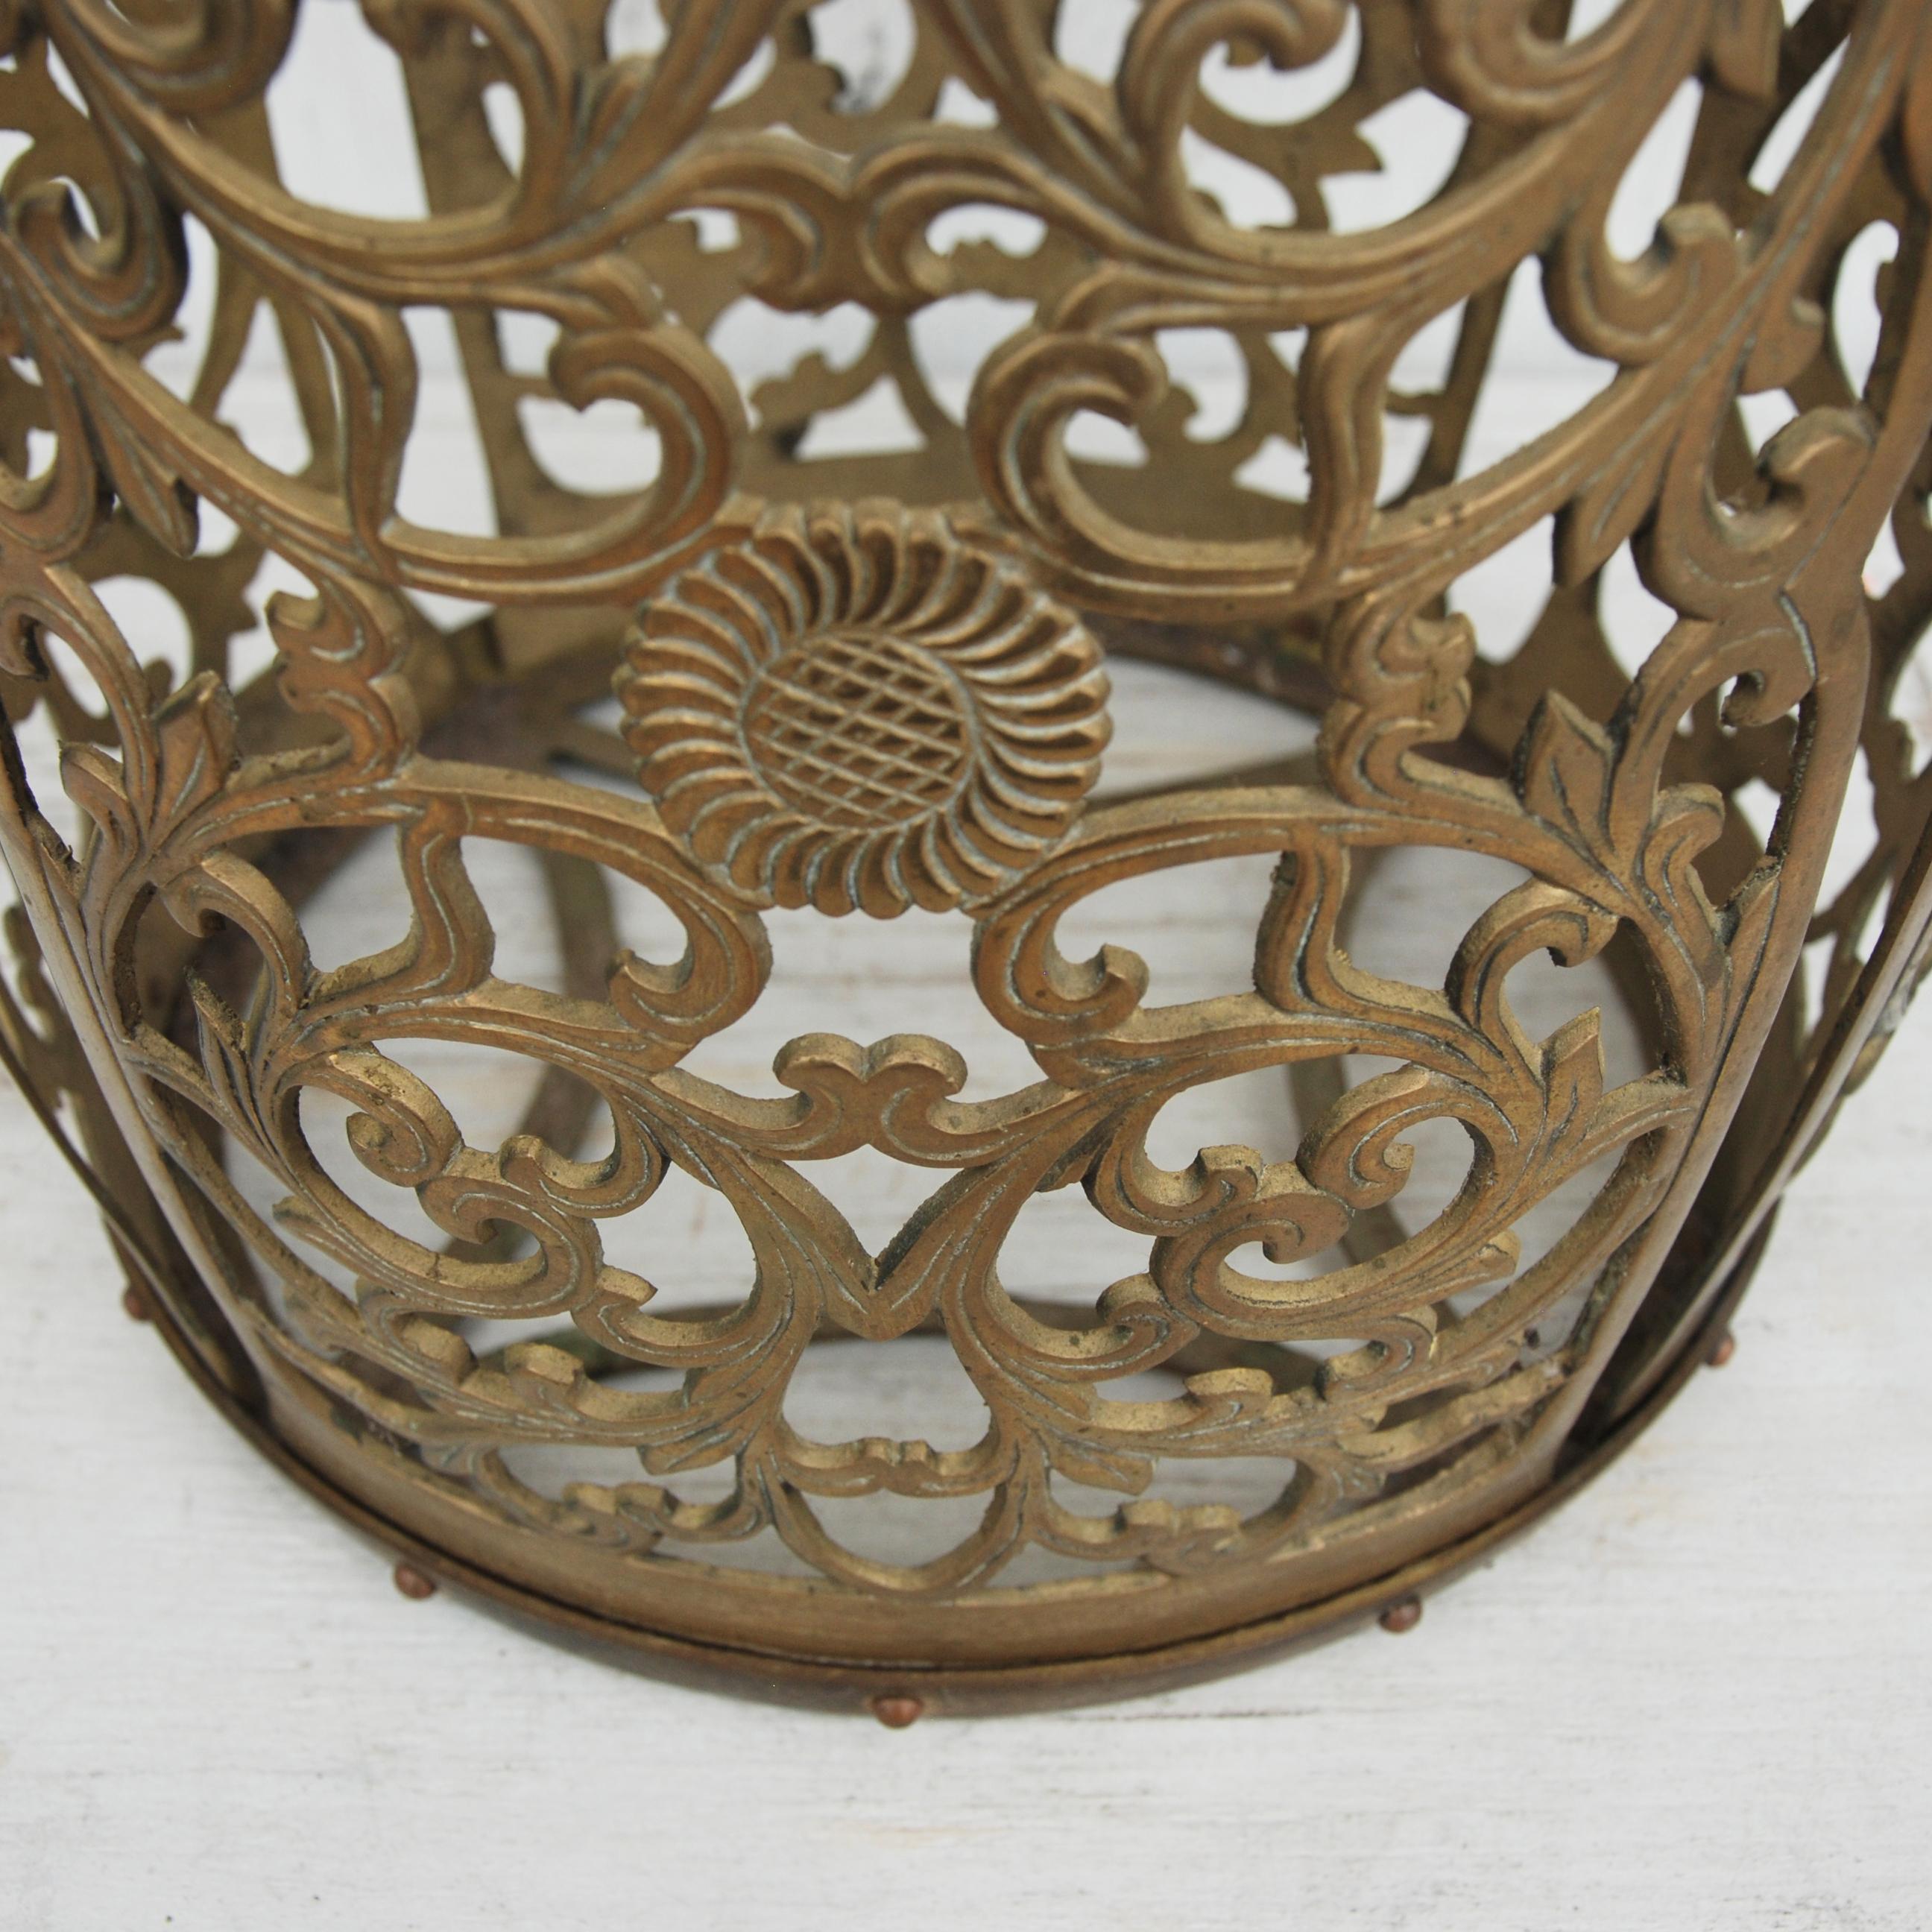 Heavy, polished brass stool. Chinoisere style, with floral fretwork throughout.